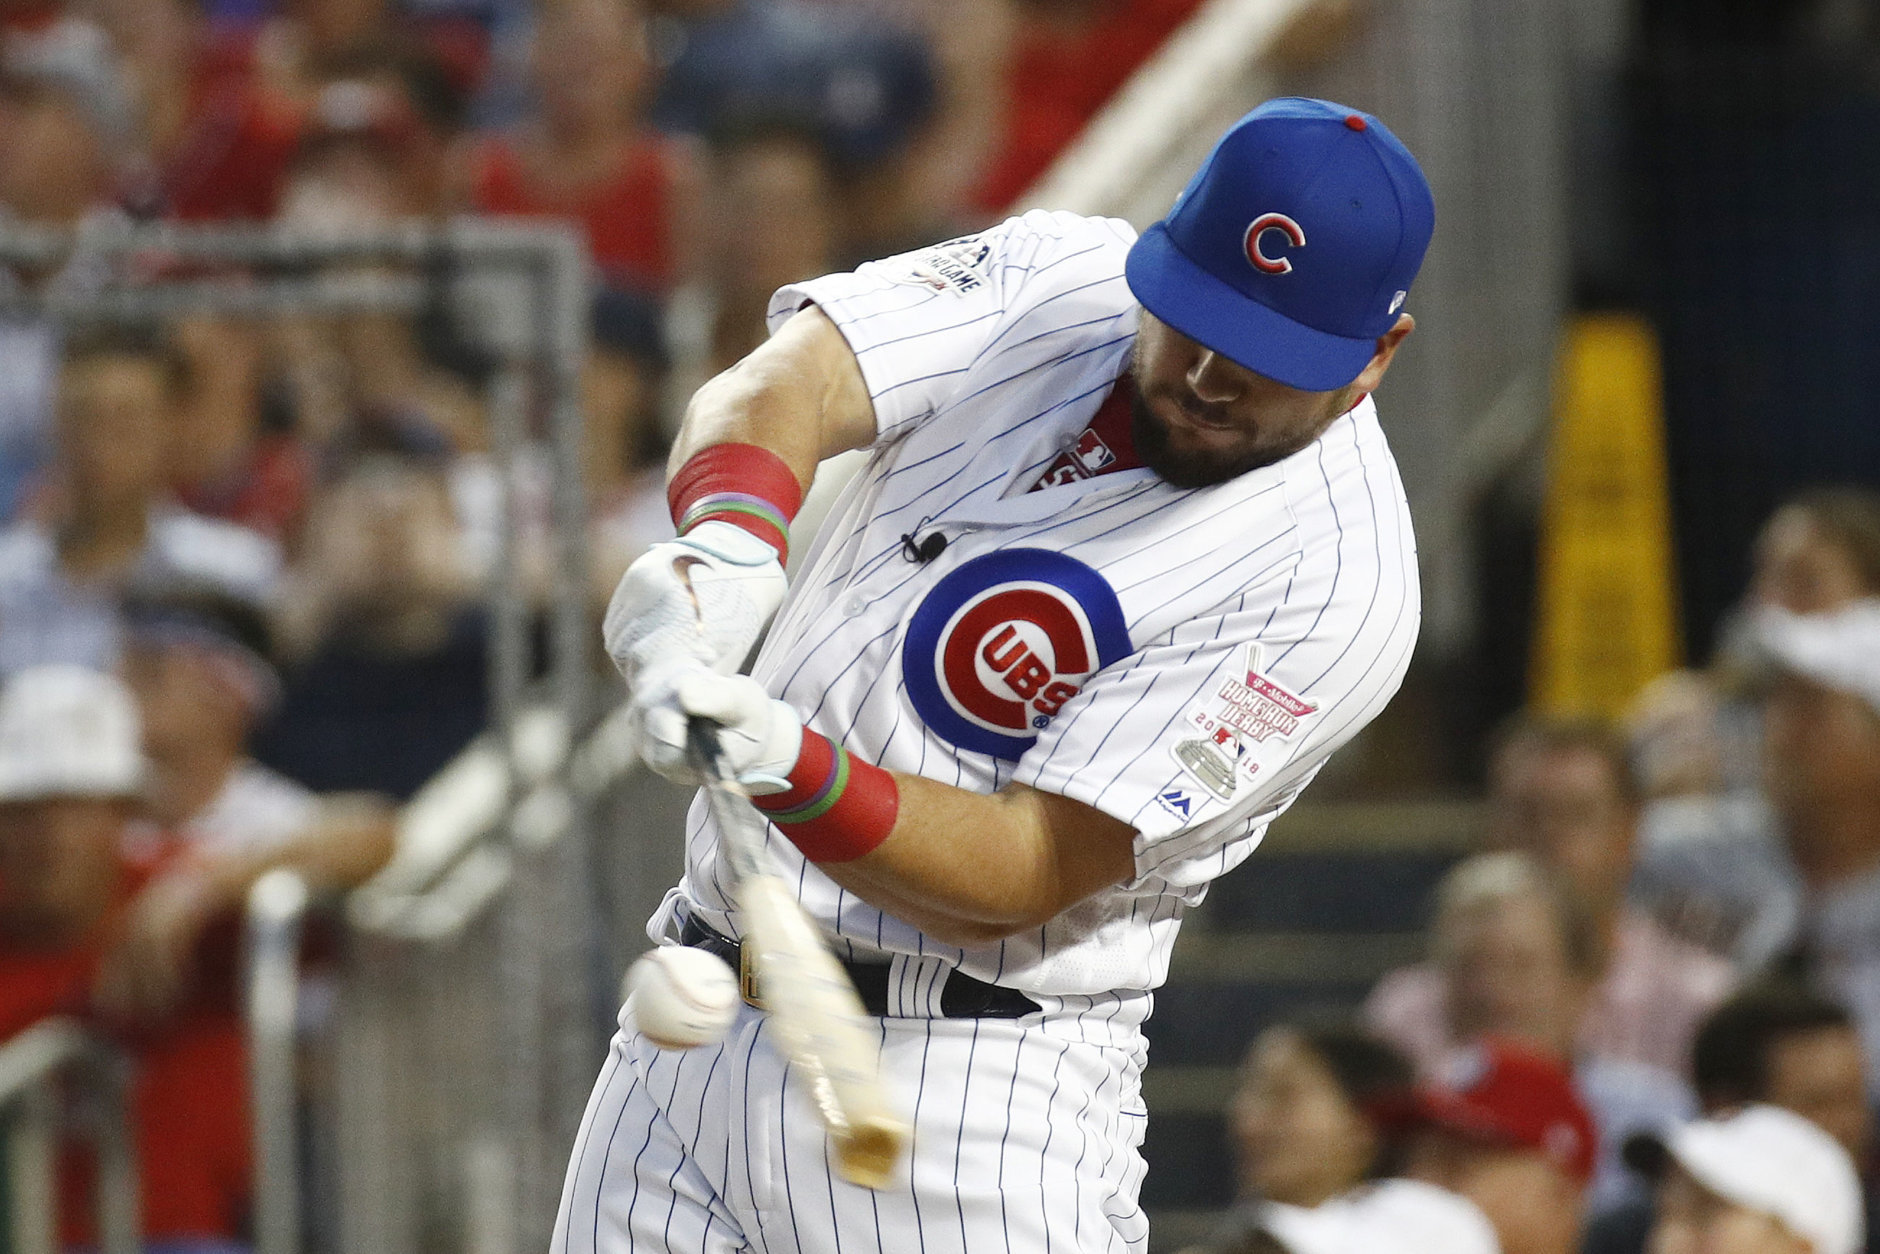 Chicago Cubs Kyle Schwarber (12) hits during the MLB Home Run Derby, at Nationals Park, Monday, July 16, 2018 in Washington. The 89th MLB baseball All-Star Game will be played Tuesday.(AP Photo/Patrick Semansky)